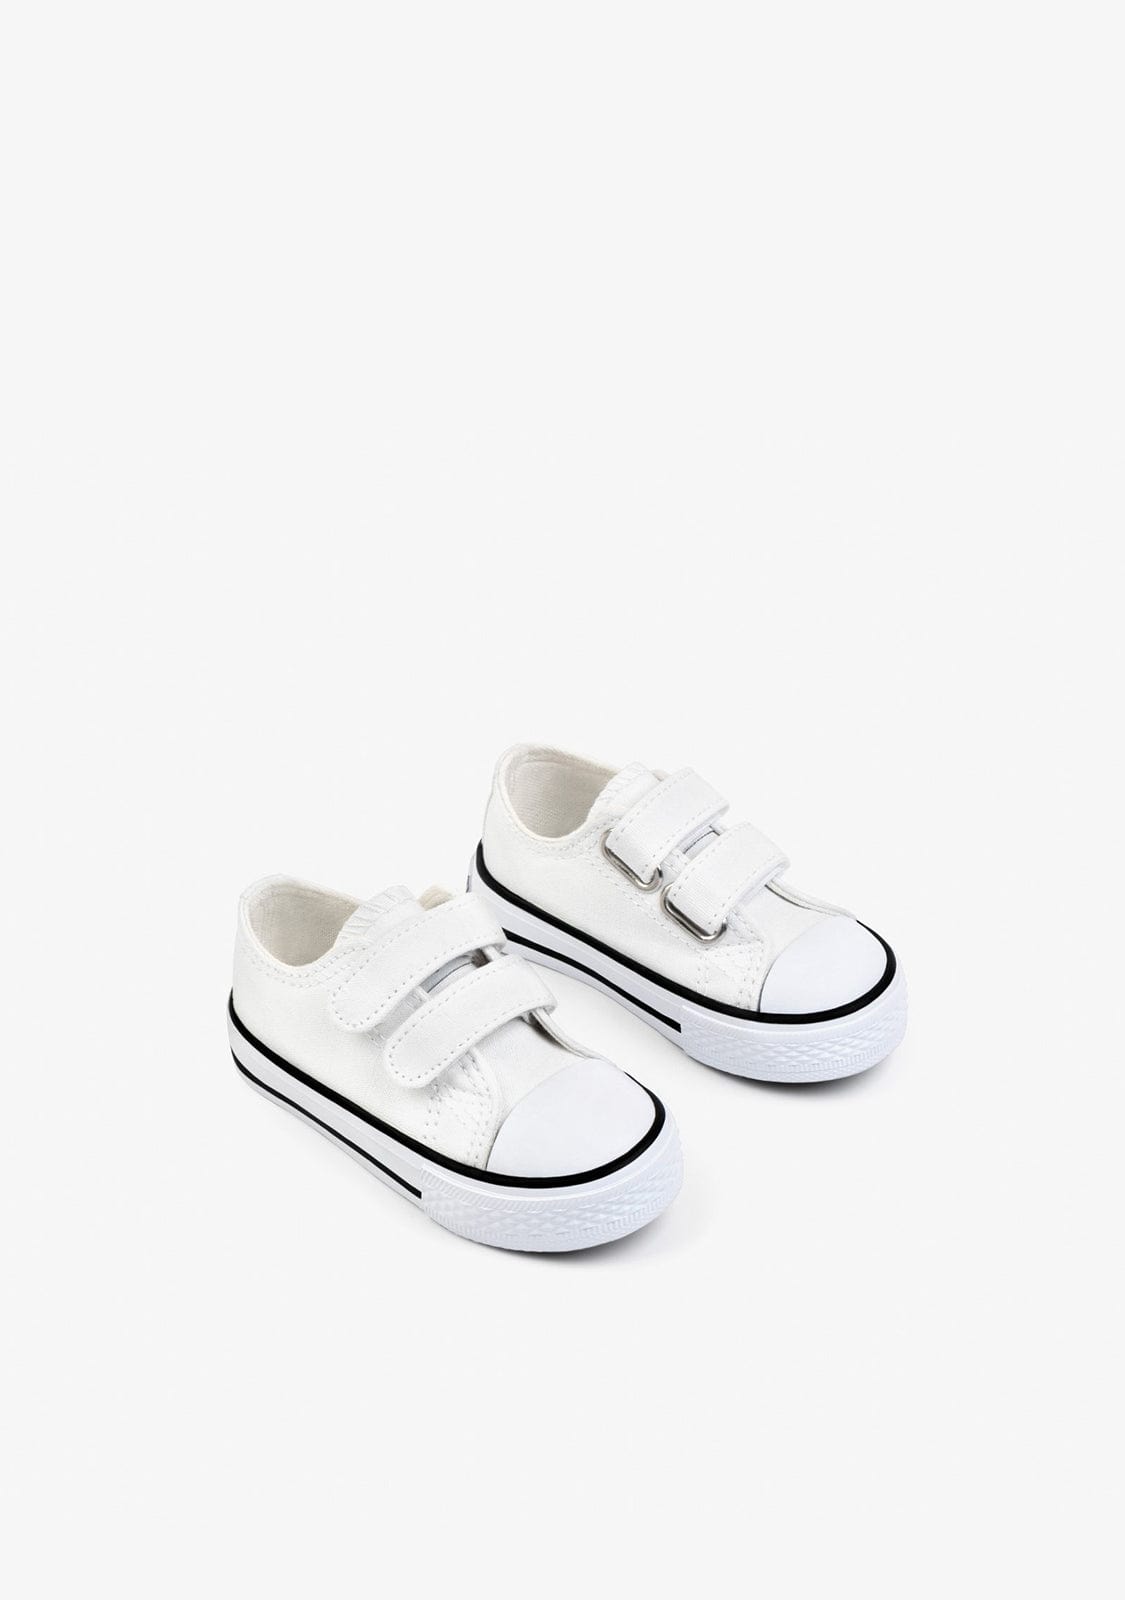 OSITO Shoes Baby's White Adherent Strips Sneakers Canvas